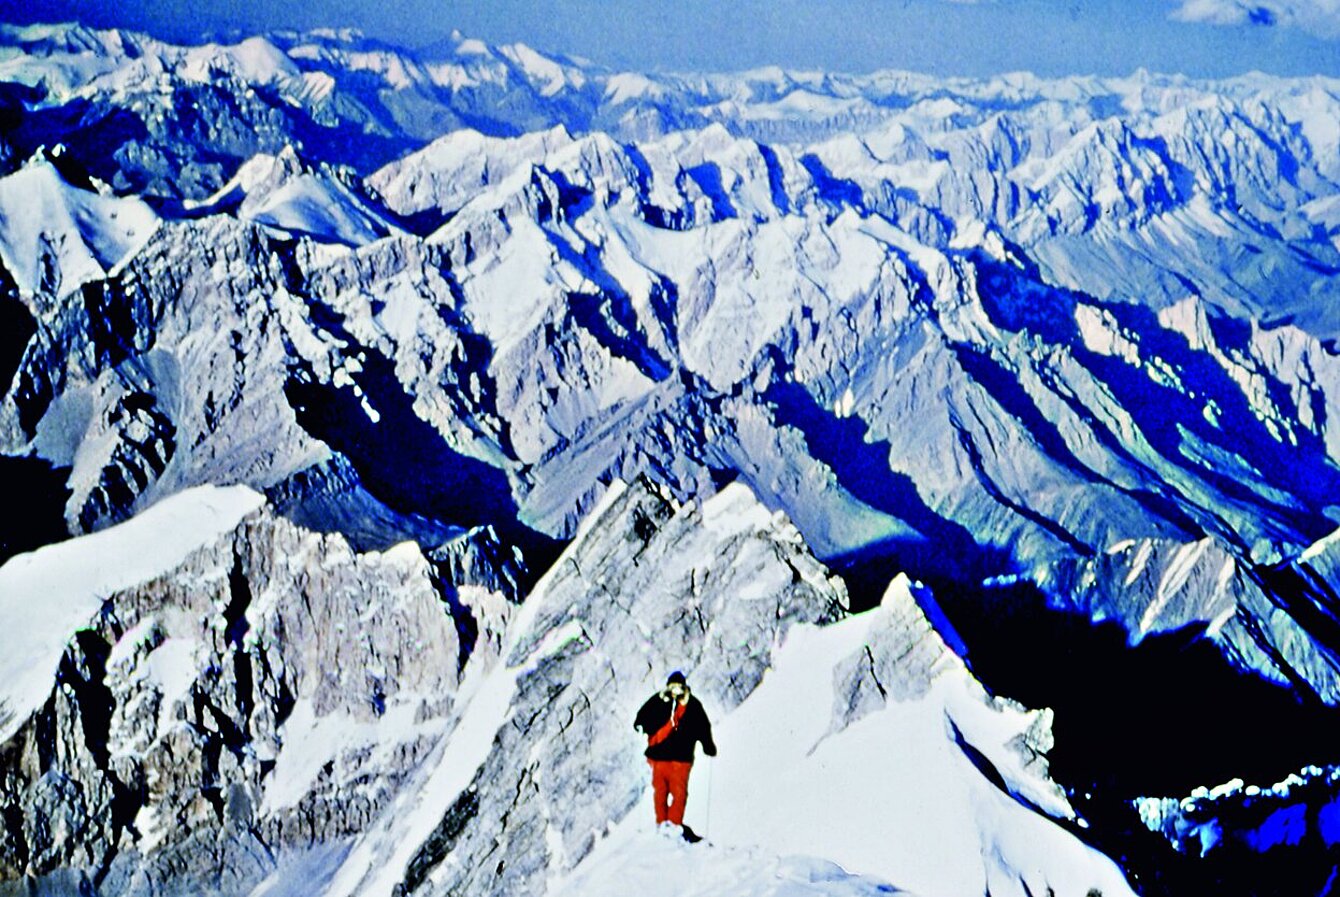 Photograph of a man with red trousers and black jacket walking away from the camera. In the background white mountain peaks can be seen up to the horizon.